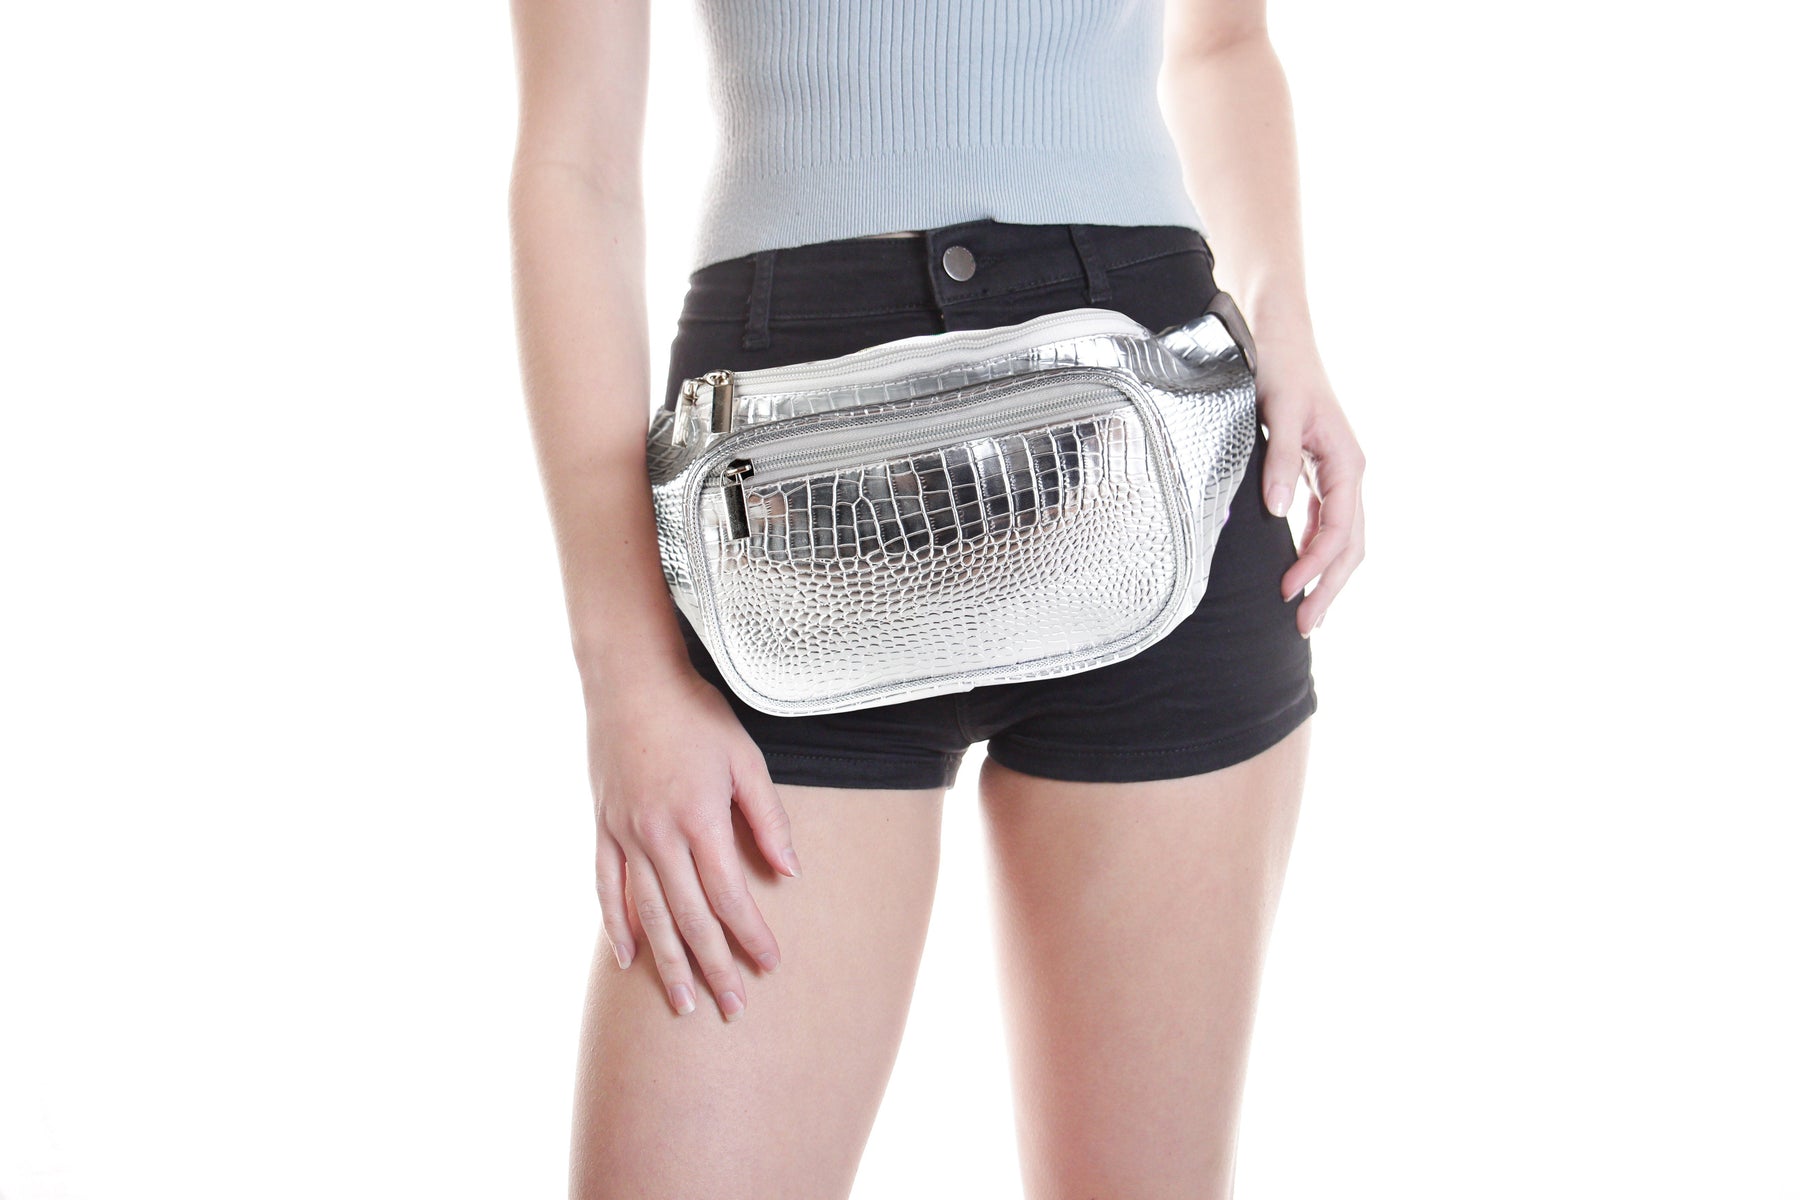 Fanny Pack Silver Fanny Pack - SoJourner Bags